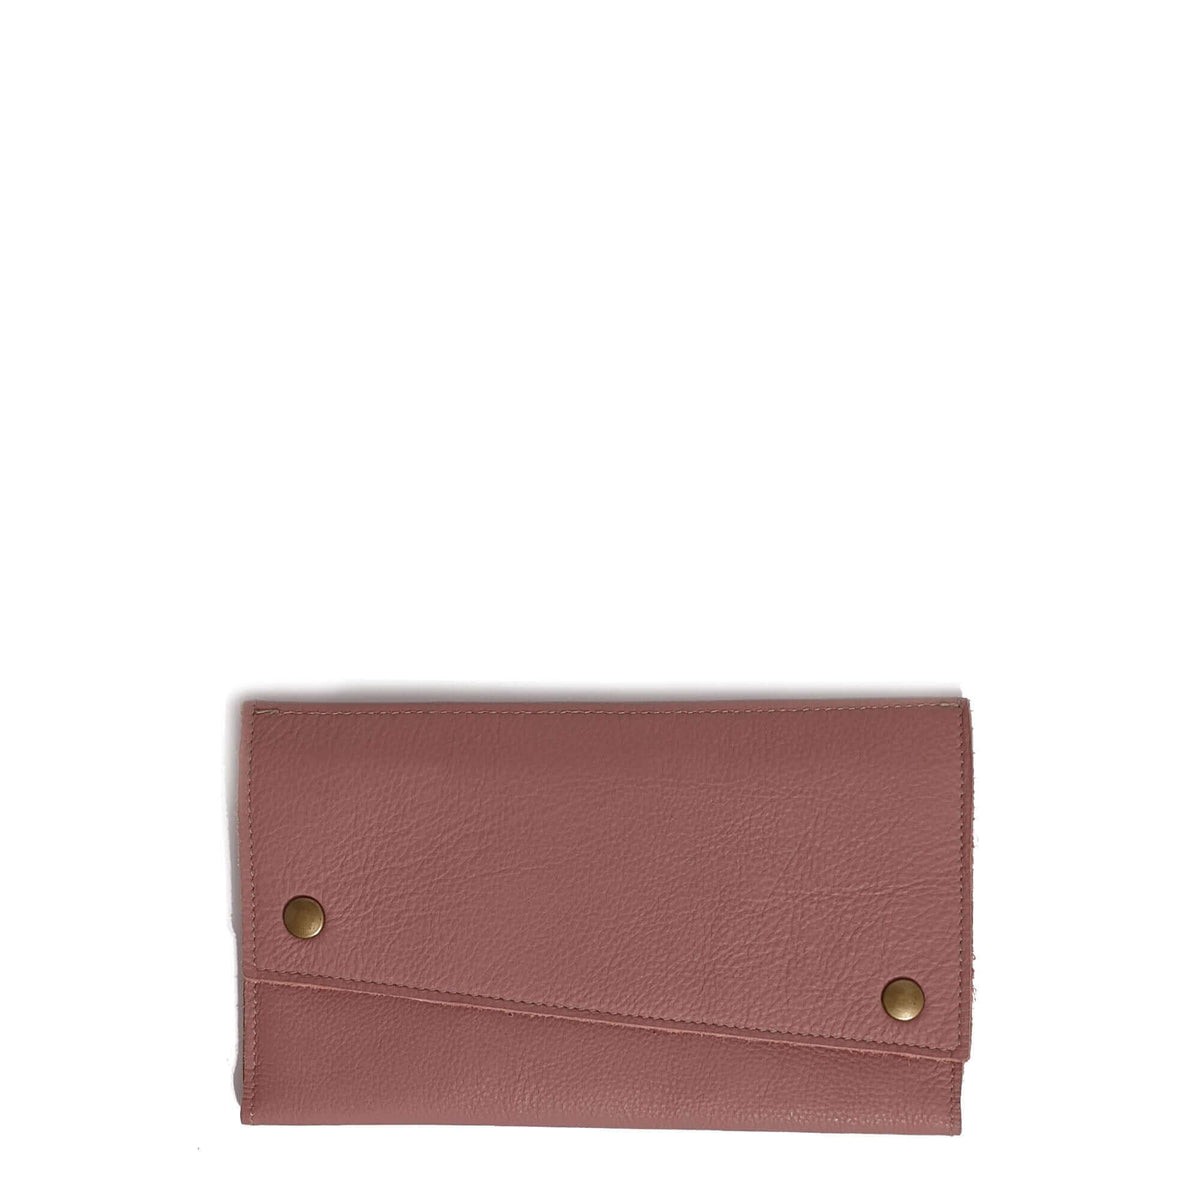 Leather Tri-fold wallet, mauve, Brynn Capella, made in USA leather goods